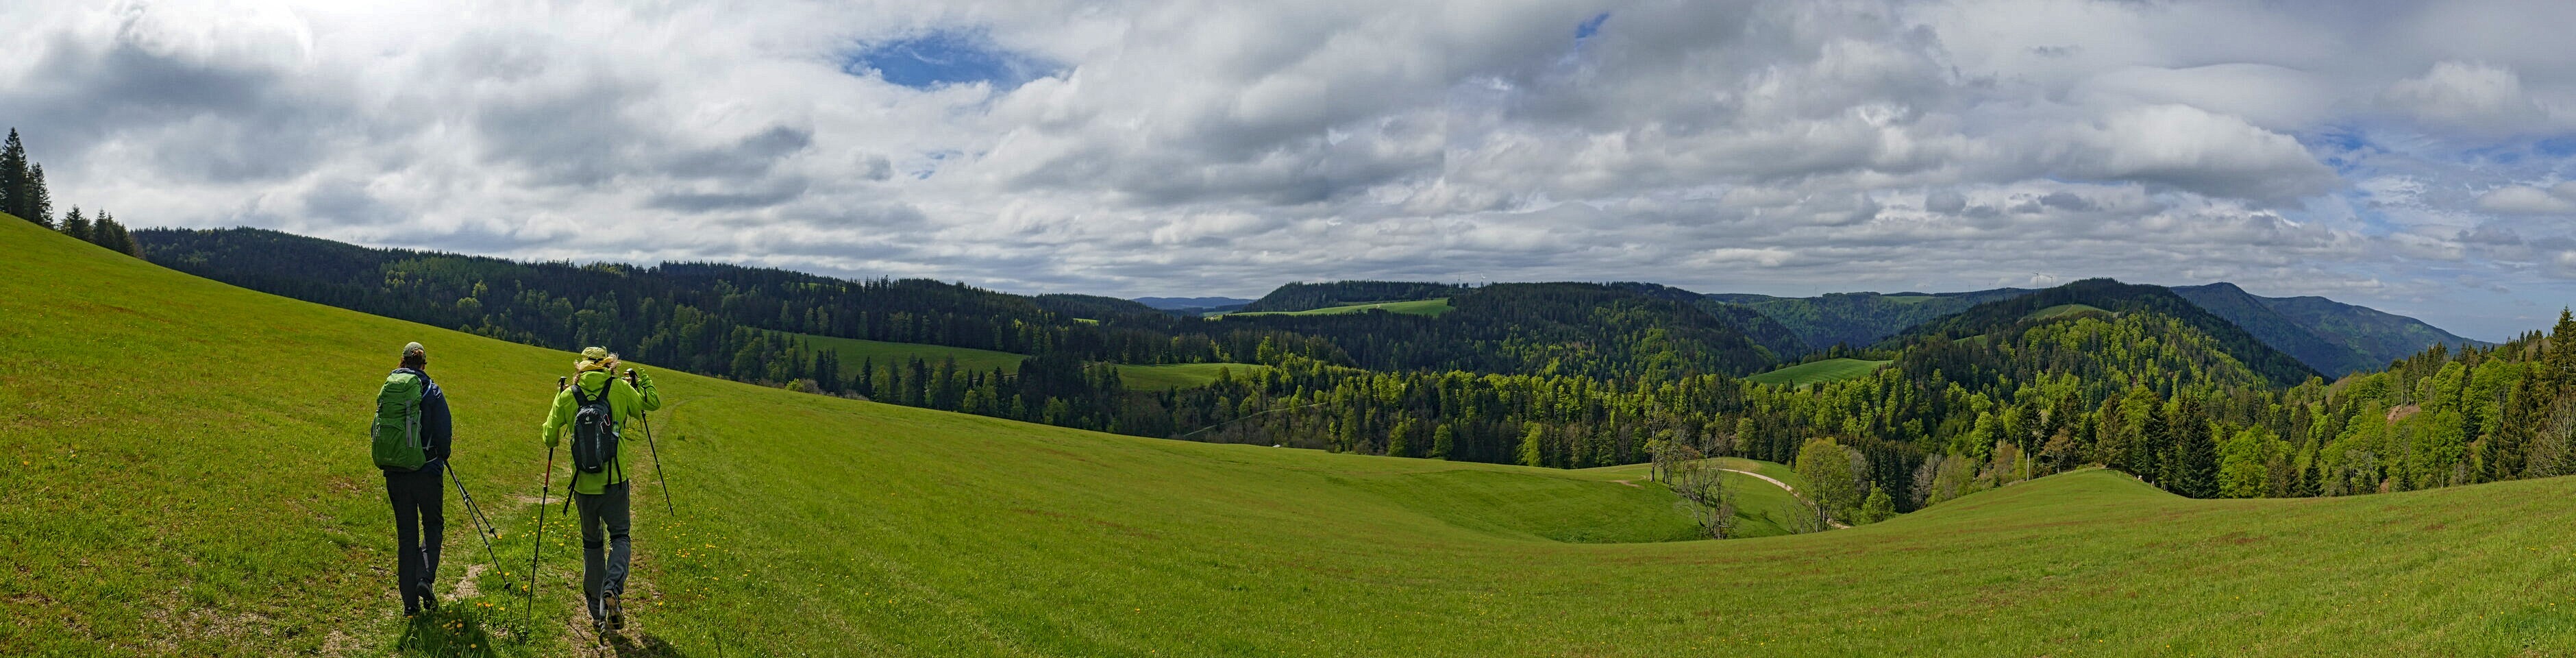 Panorama am Brend-SW-Hang